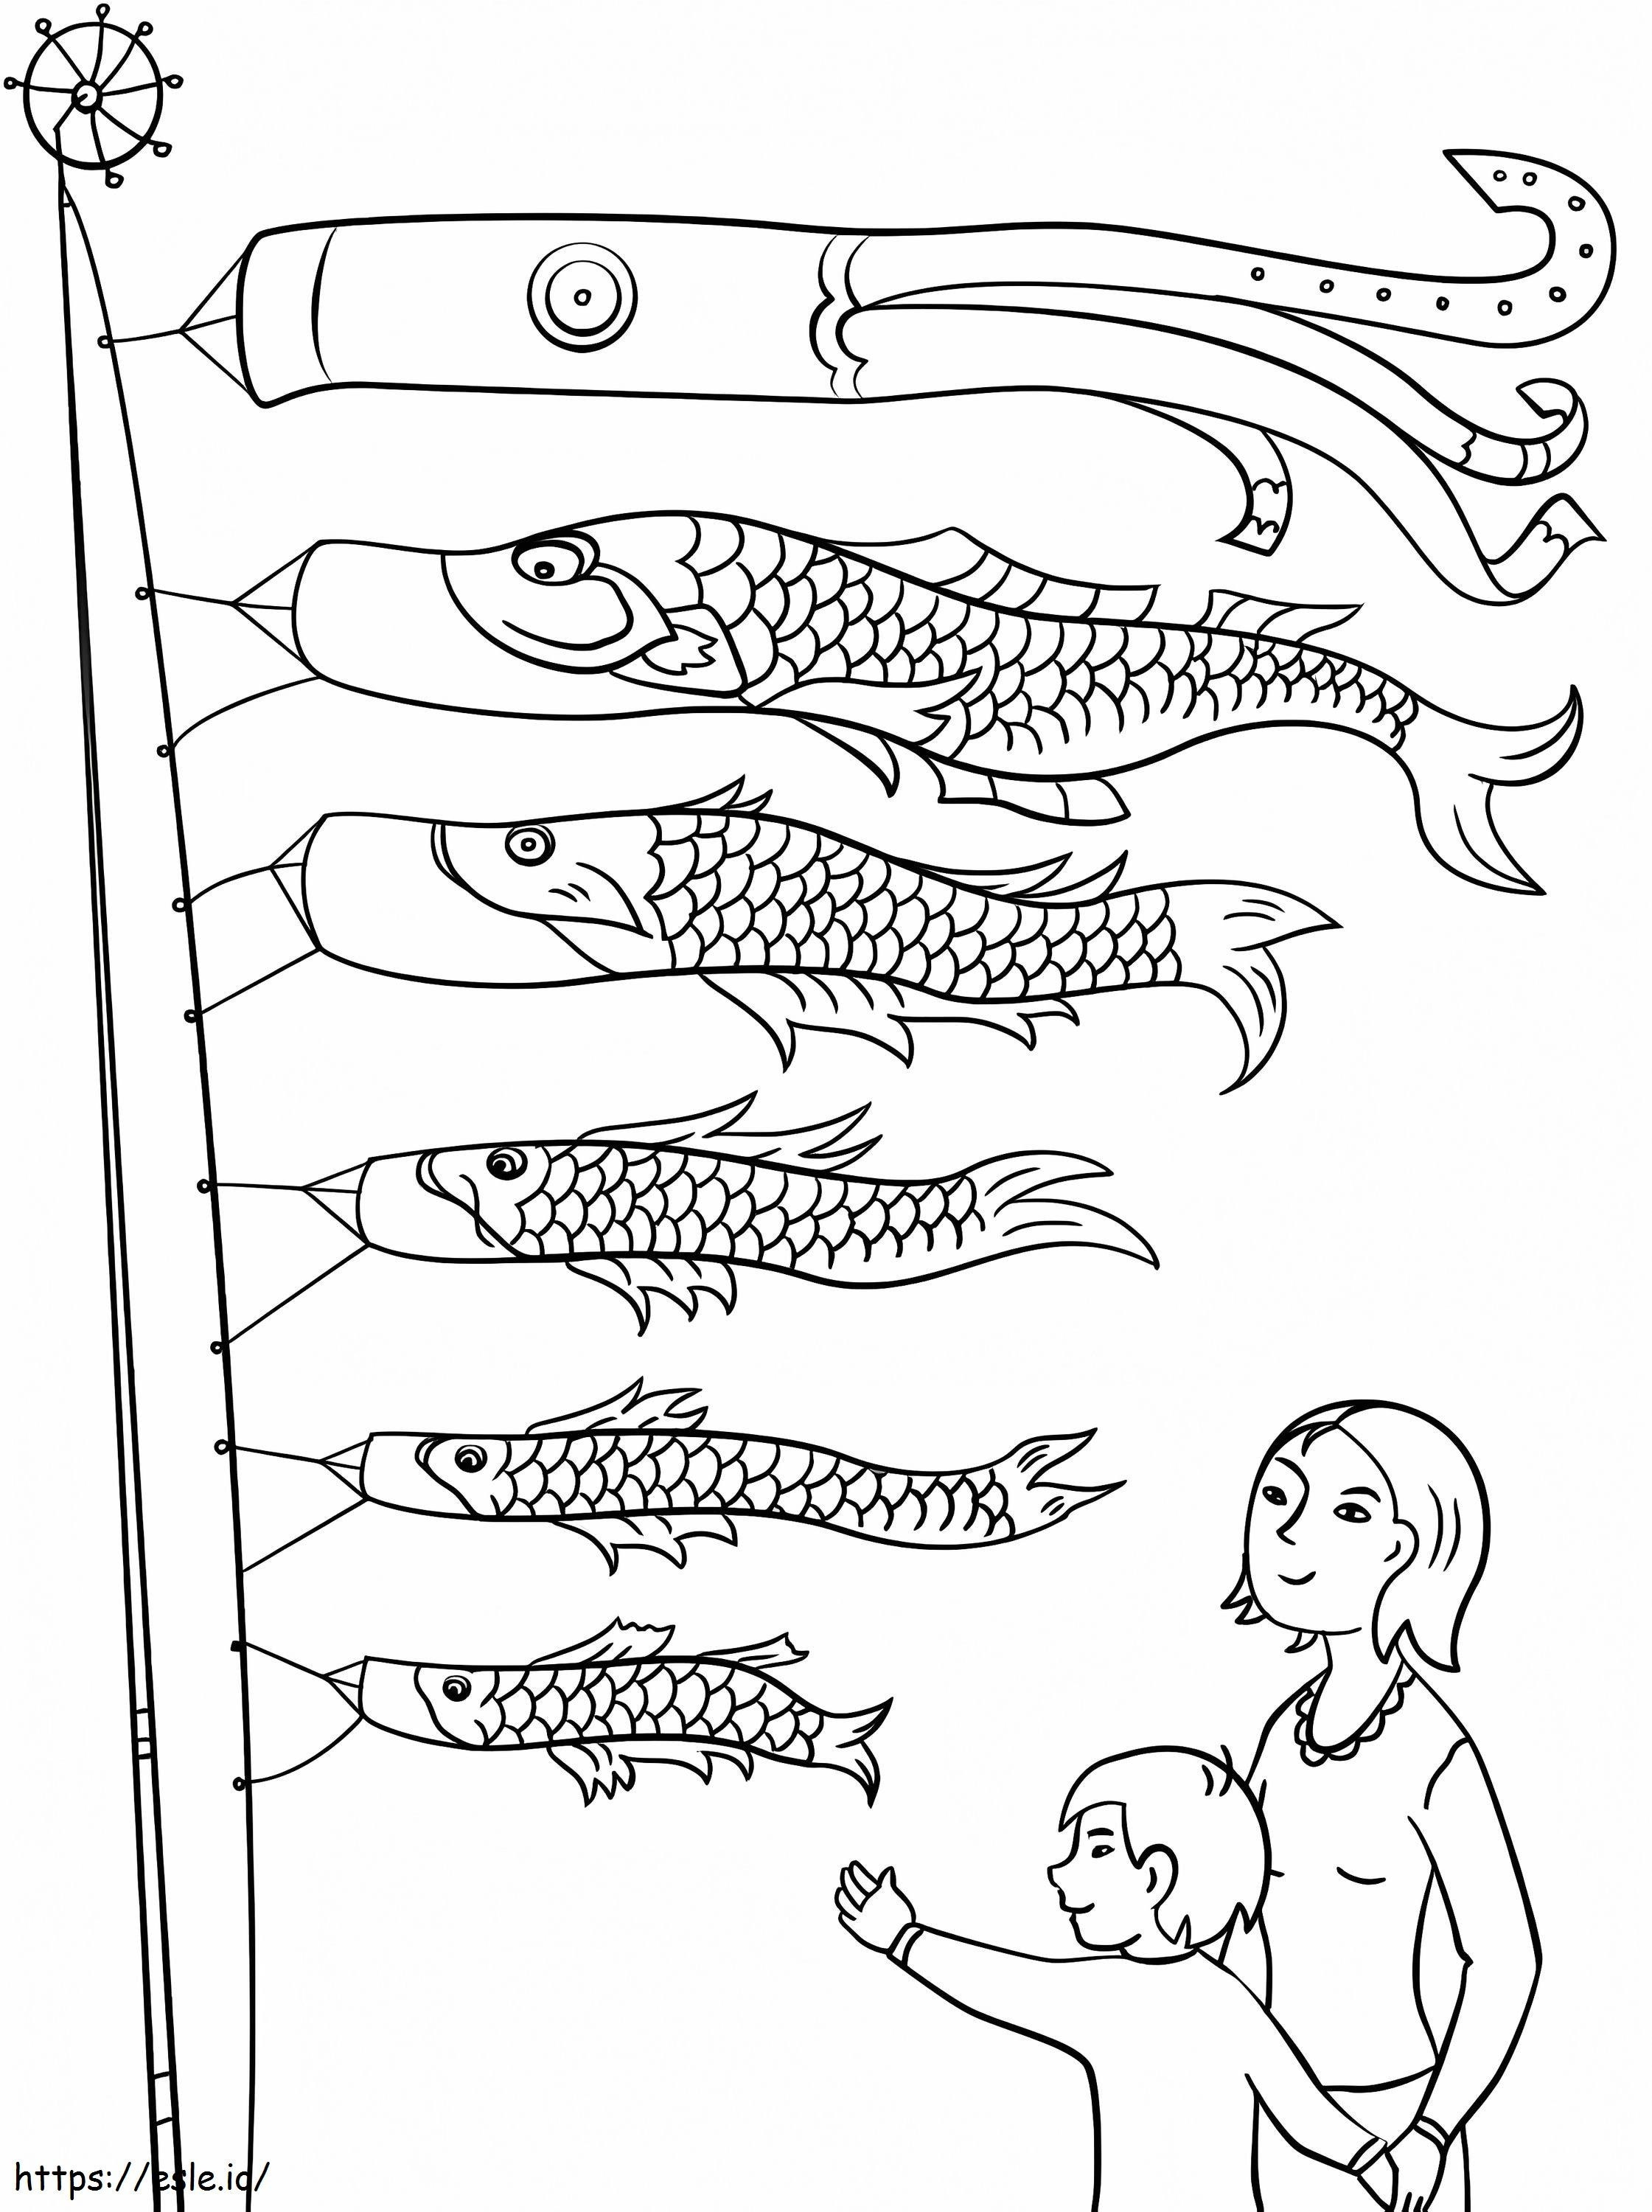 Japanese Children'S Day coloring page